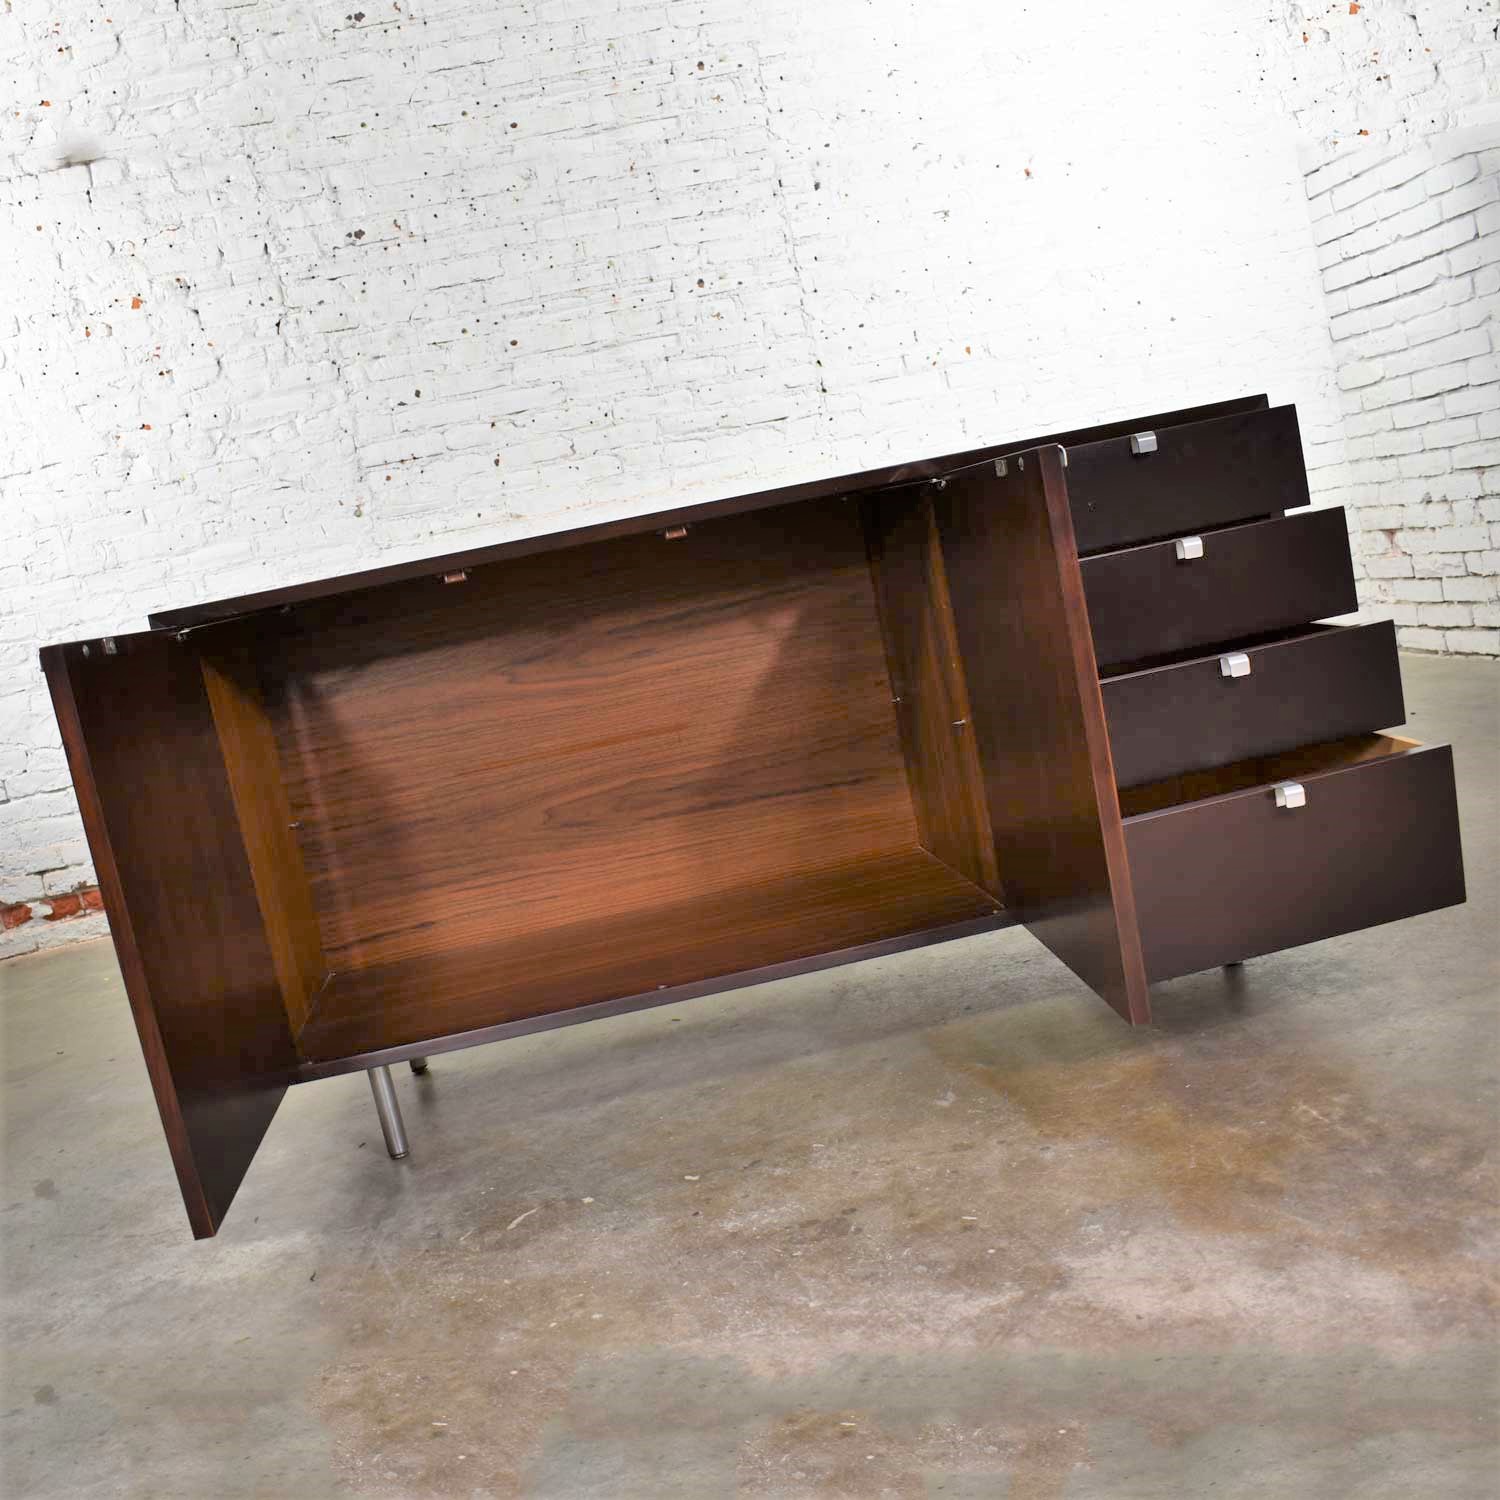 Early Basic Cabinet Series Walnut Sideboard Credenza by George Nelson for Herman Miller